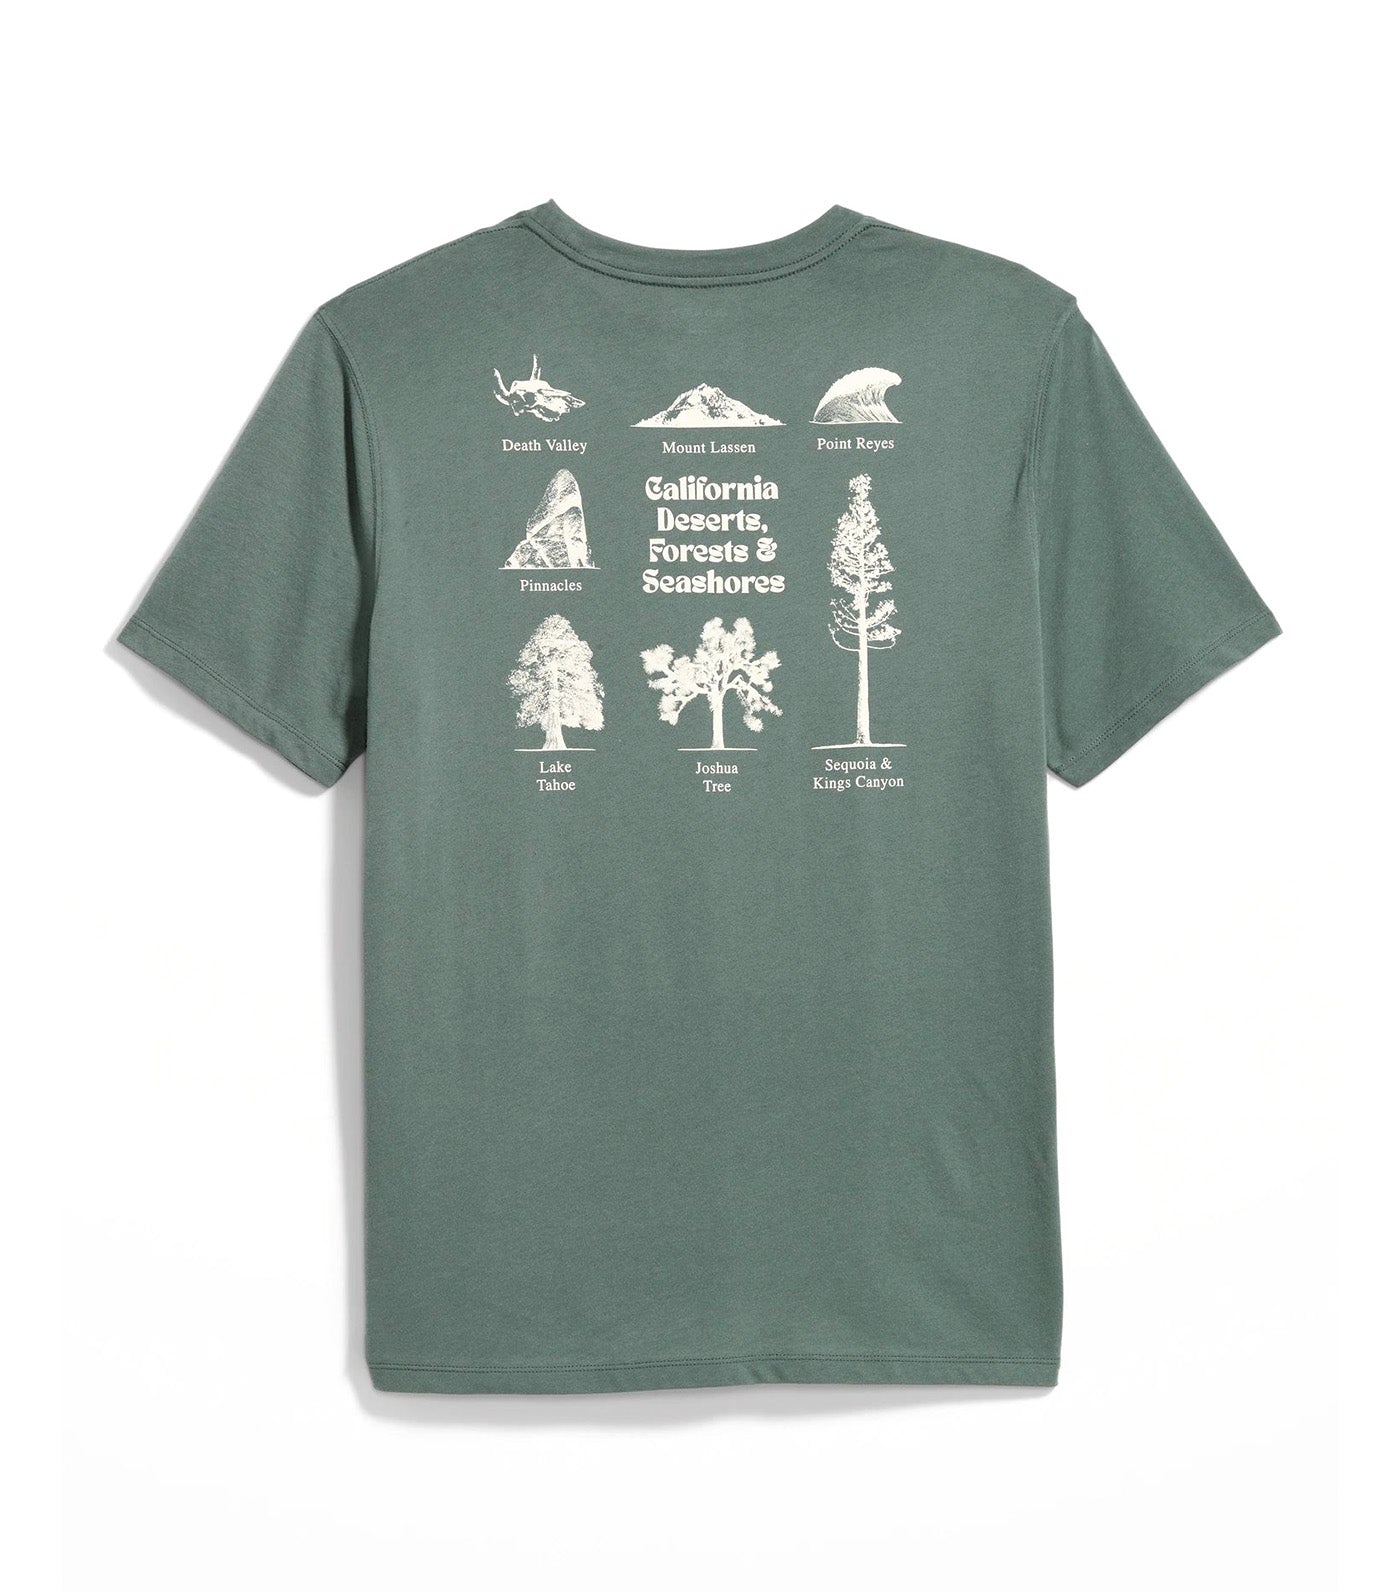 Soft-Washed Graphic T-Shirt for Men Terrestrial Green